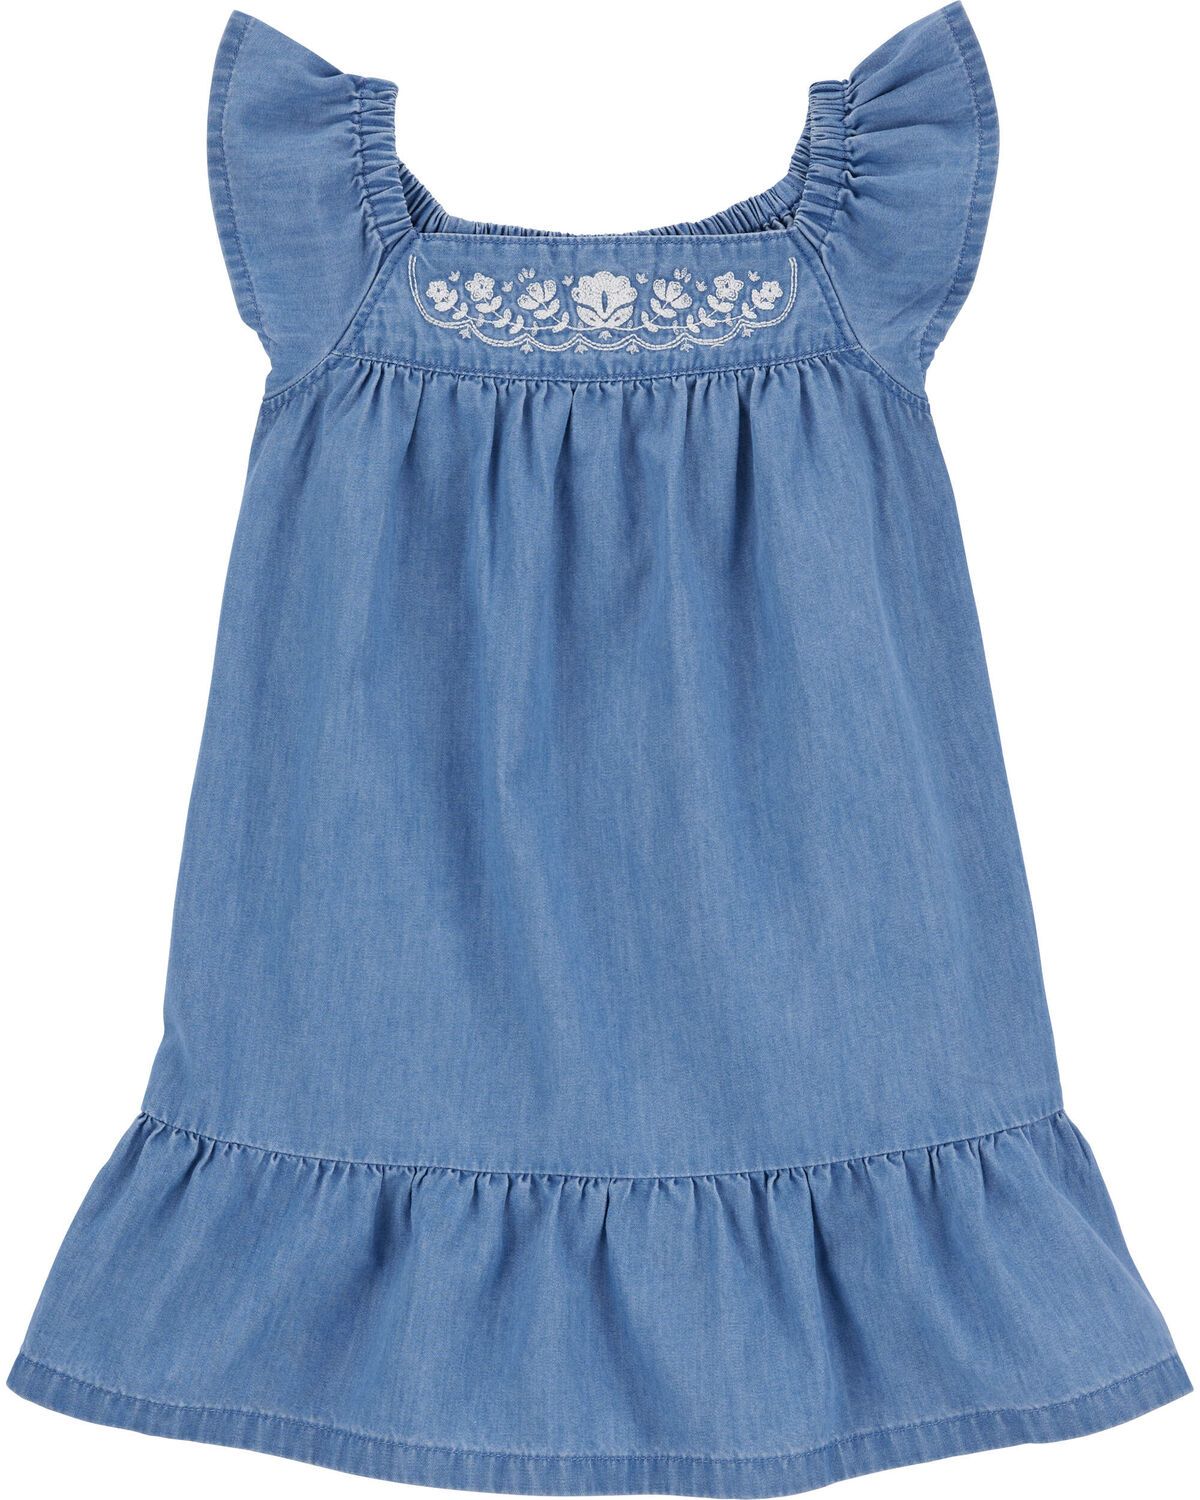 Toddler Embroidered Chambray Dress | Carter's